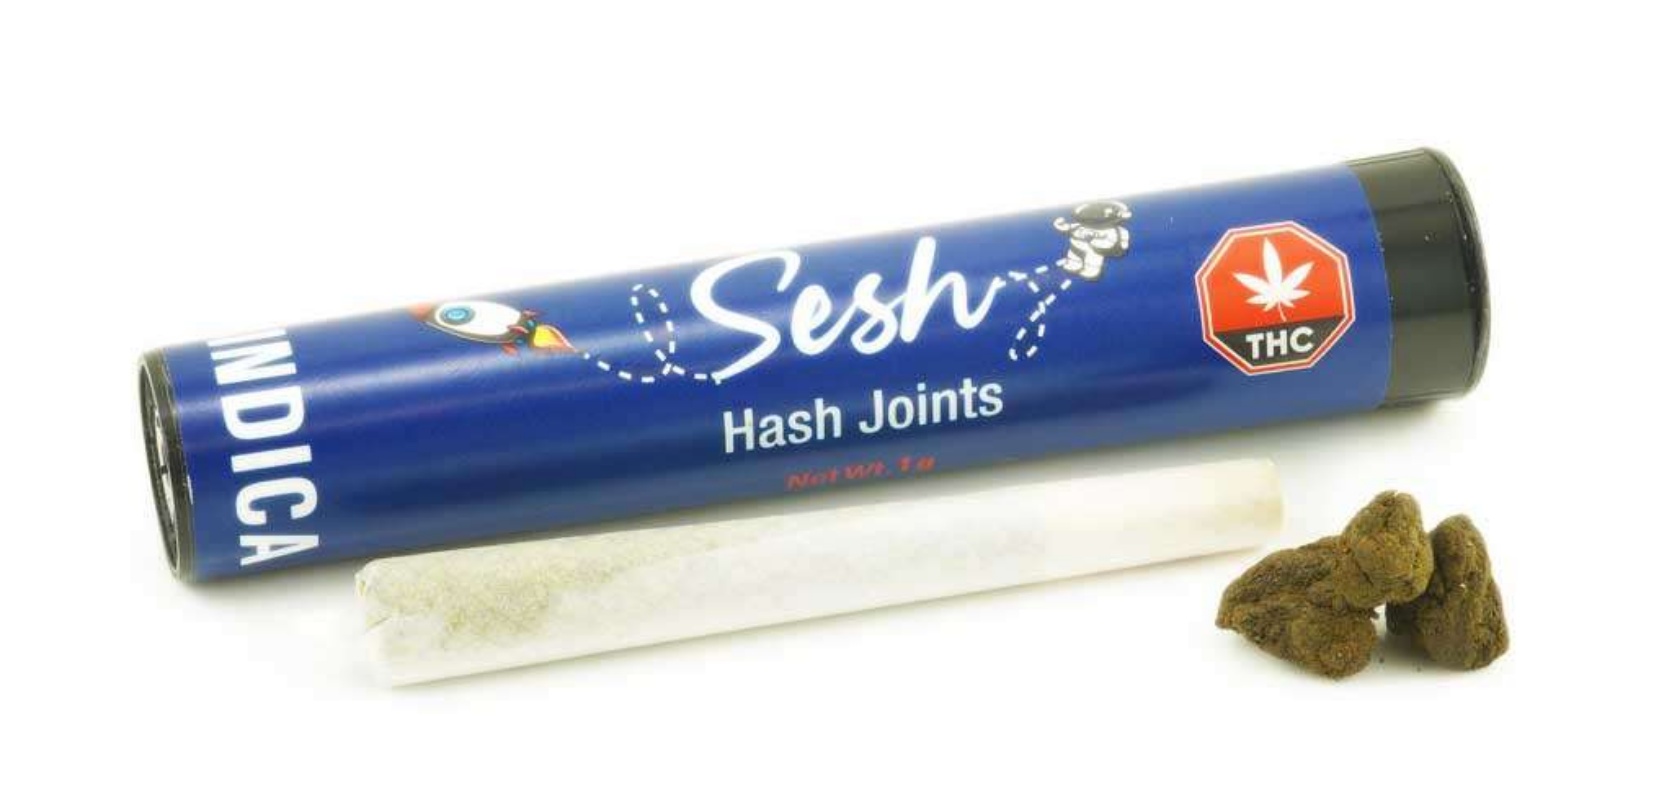 Sesh hash joints are divine hand rolled cannabis prerolls that are prefilled with a blend of 1 gram of the finest AAAA flower and pure hashish. 